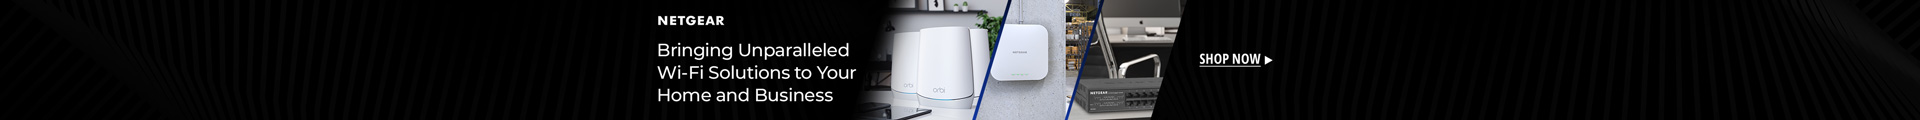 Netgear Bringing Unparalleled Wi-Fi Solution to Your Home and Business